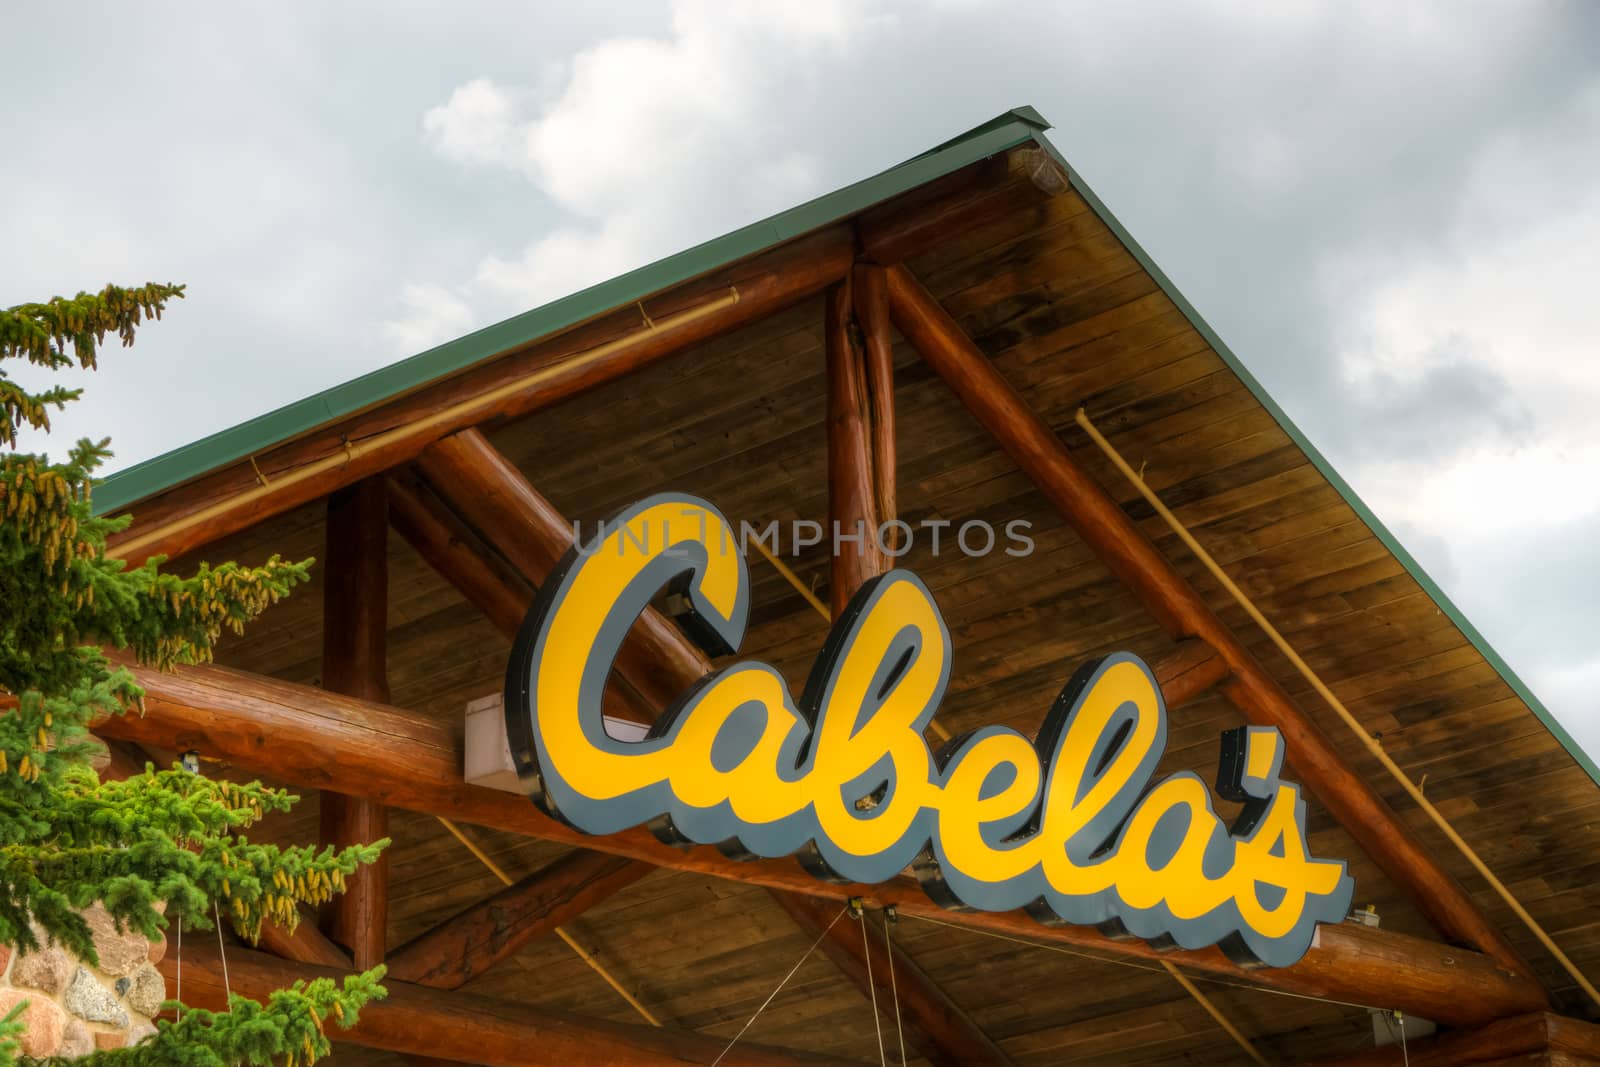 OWATONNA, MN/USA - AUGUST 9, 2015: Cabela's retail exterior. Cabela's retails hunting, fishing, camping, shooting, and related outdoor recreation merchandise.